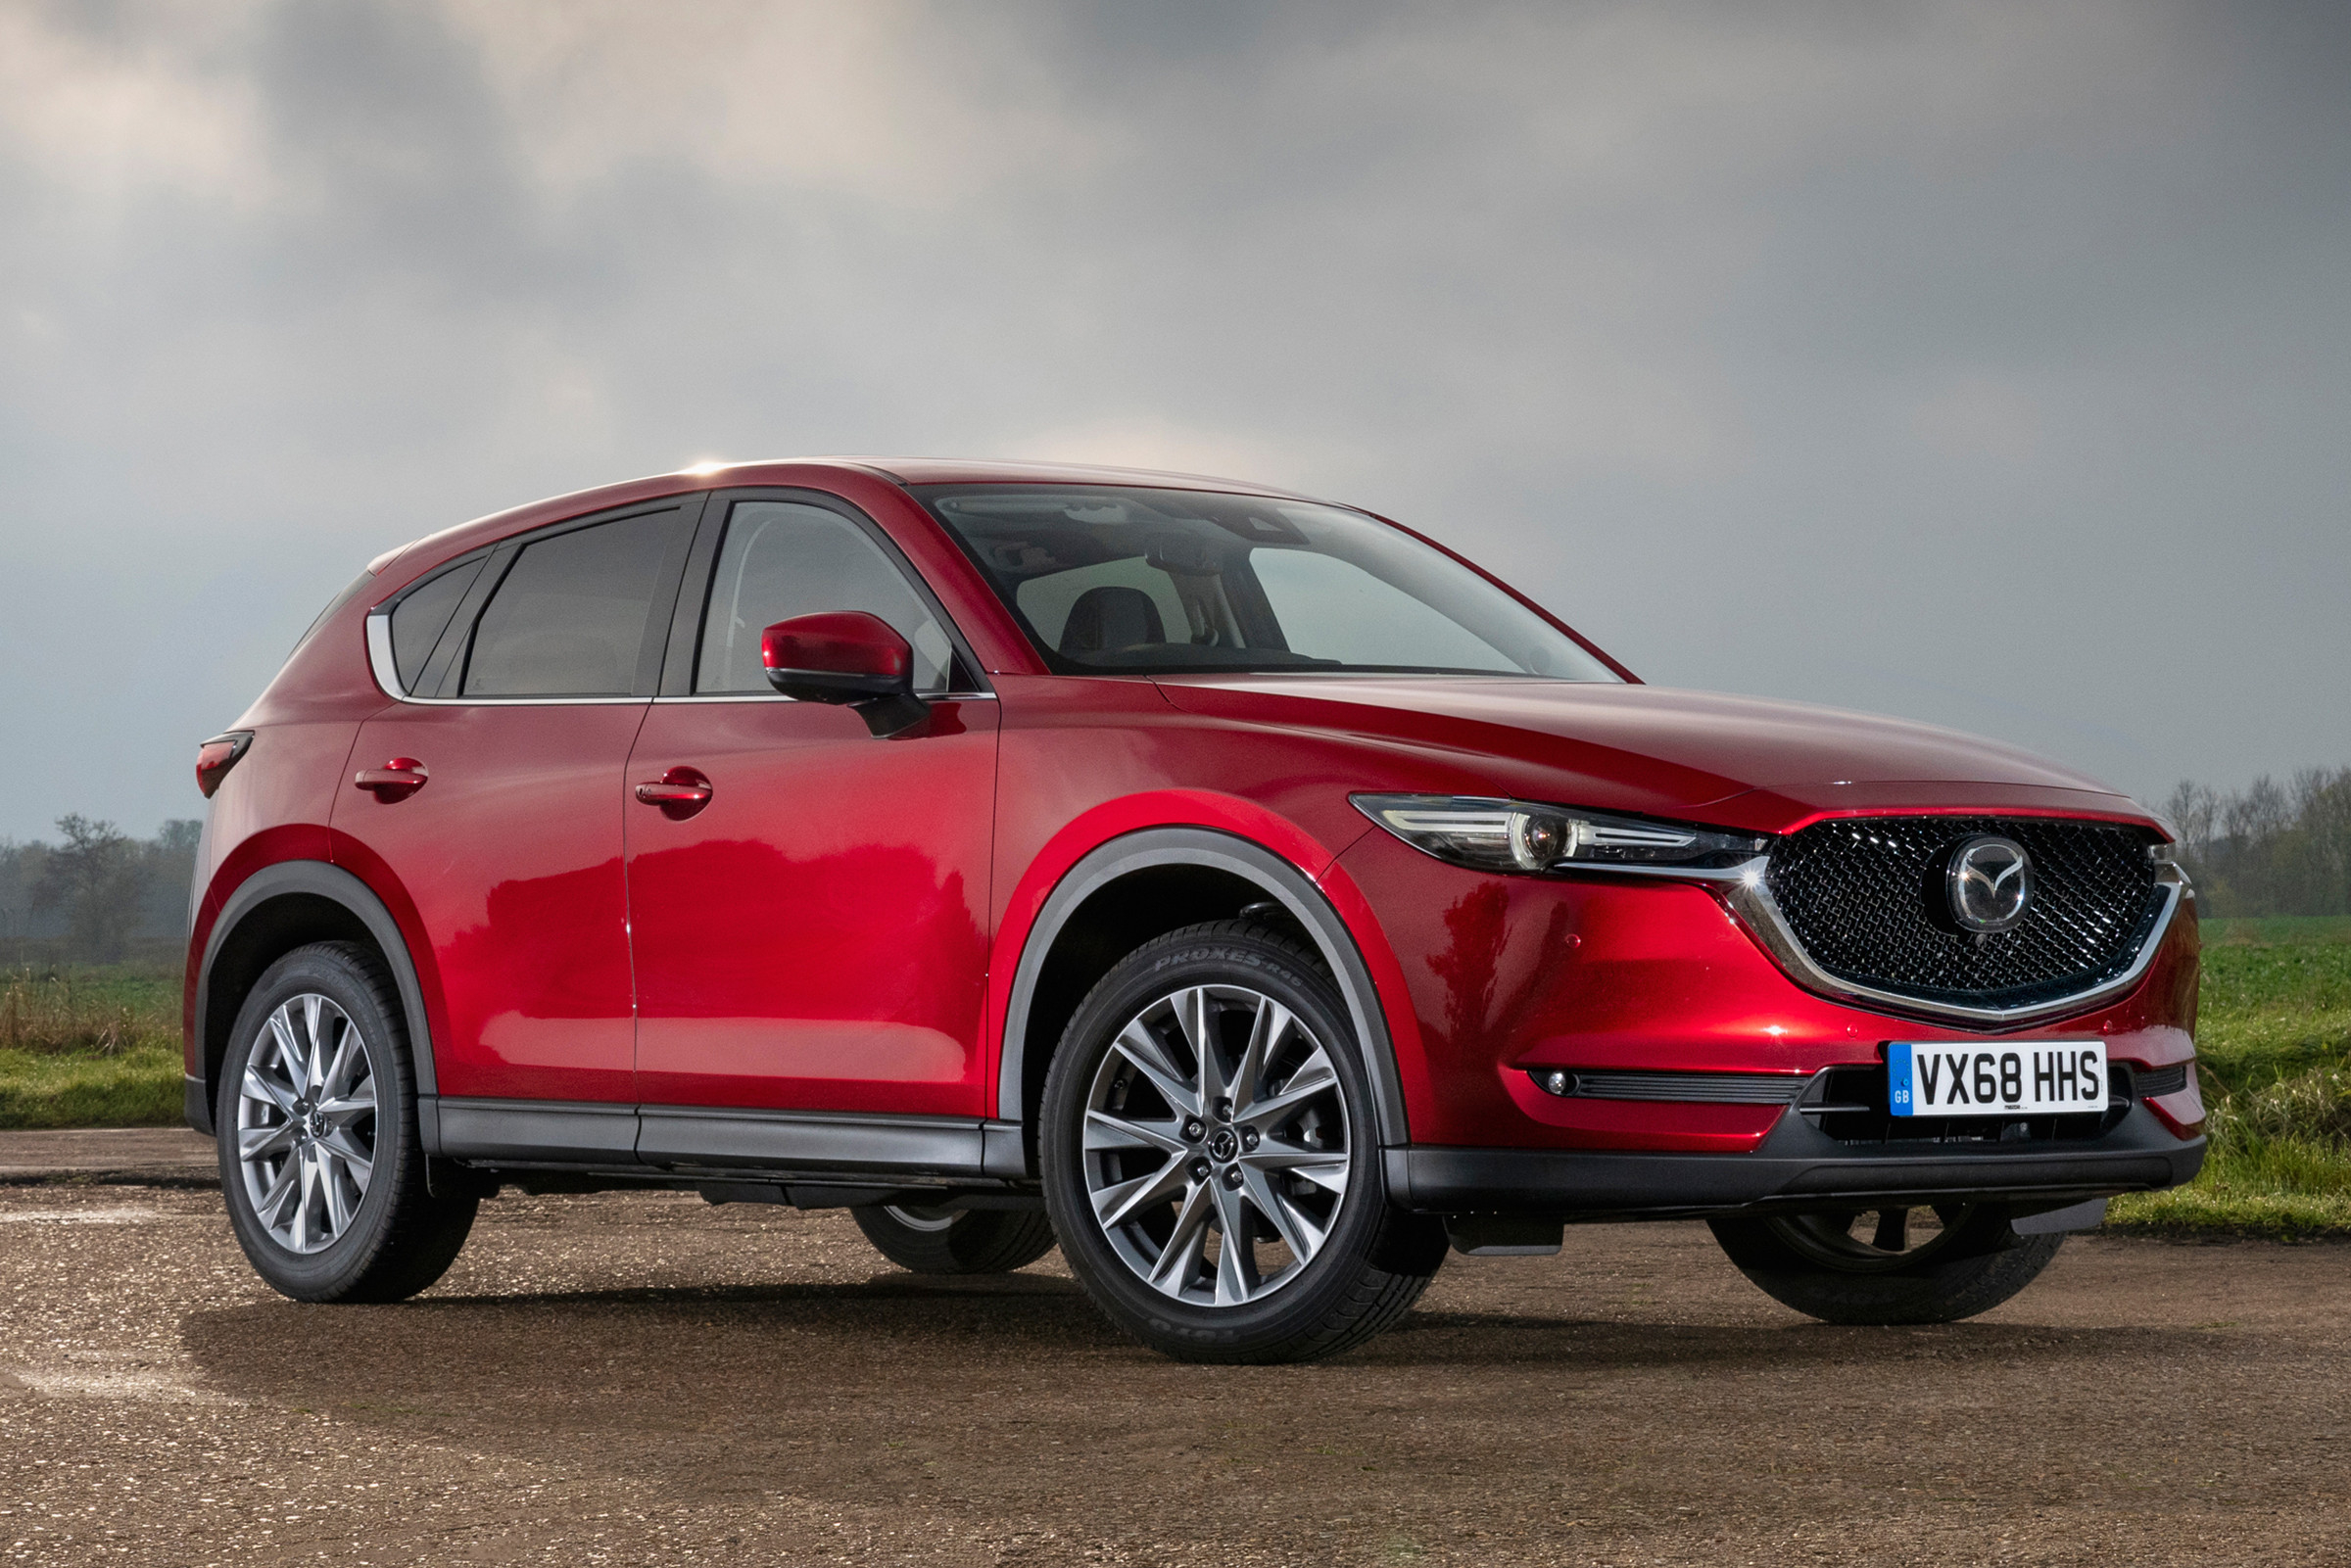 Mazda Cx-5 2019: Prices, Specification And Release Date | Carbuyer intended for Mazda Cx 5 2019 Price